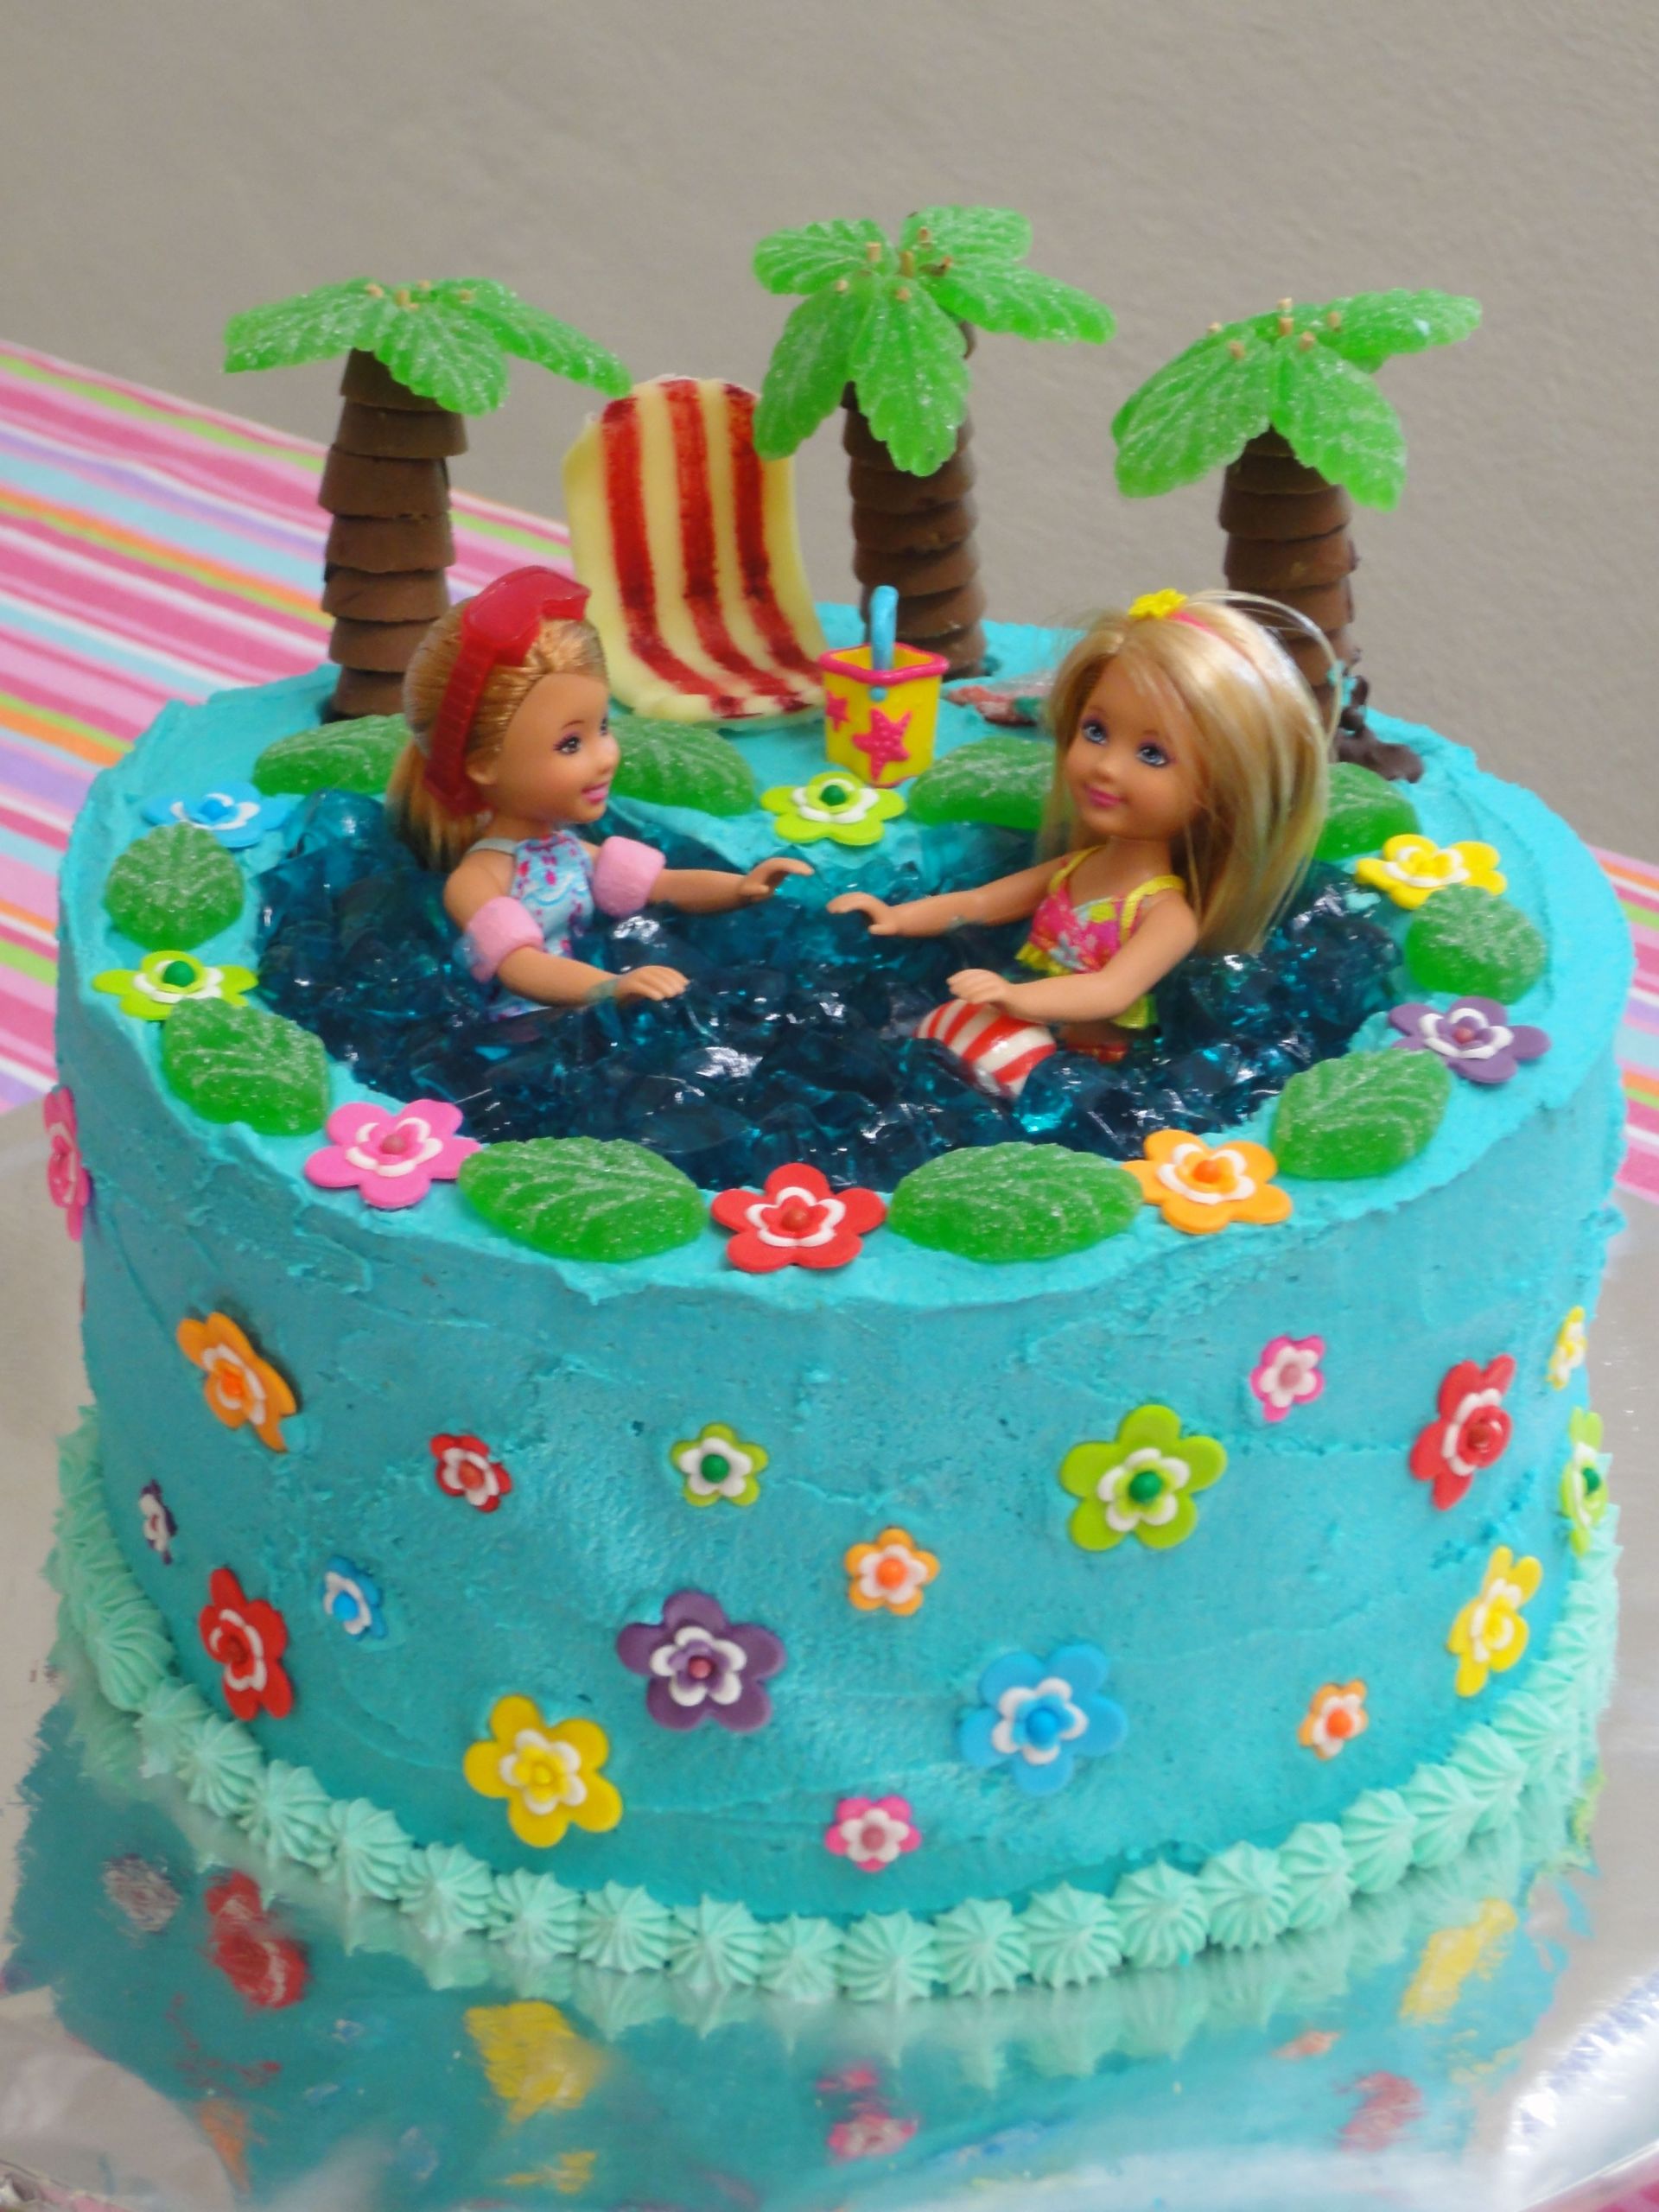 Pool Party Birthday Cake Ideas
 Barbie pool party birthday cake made by me